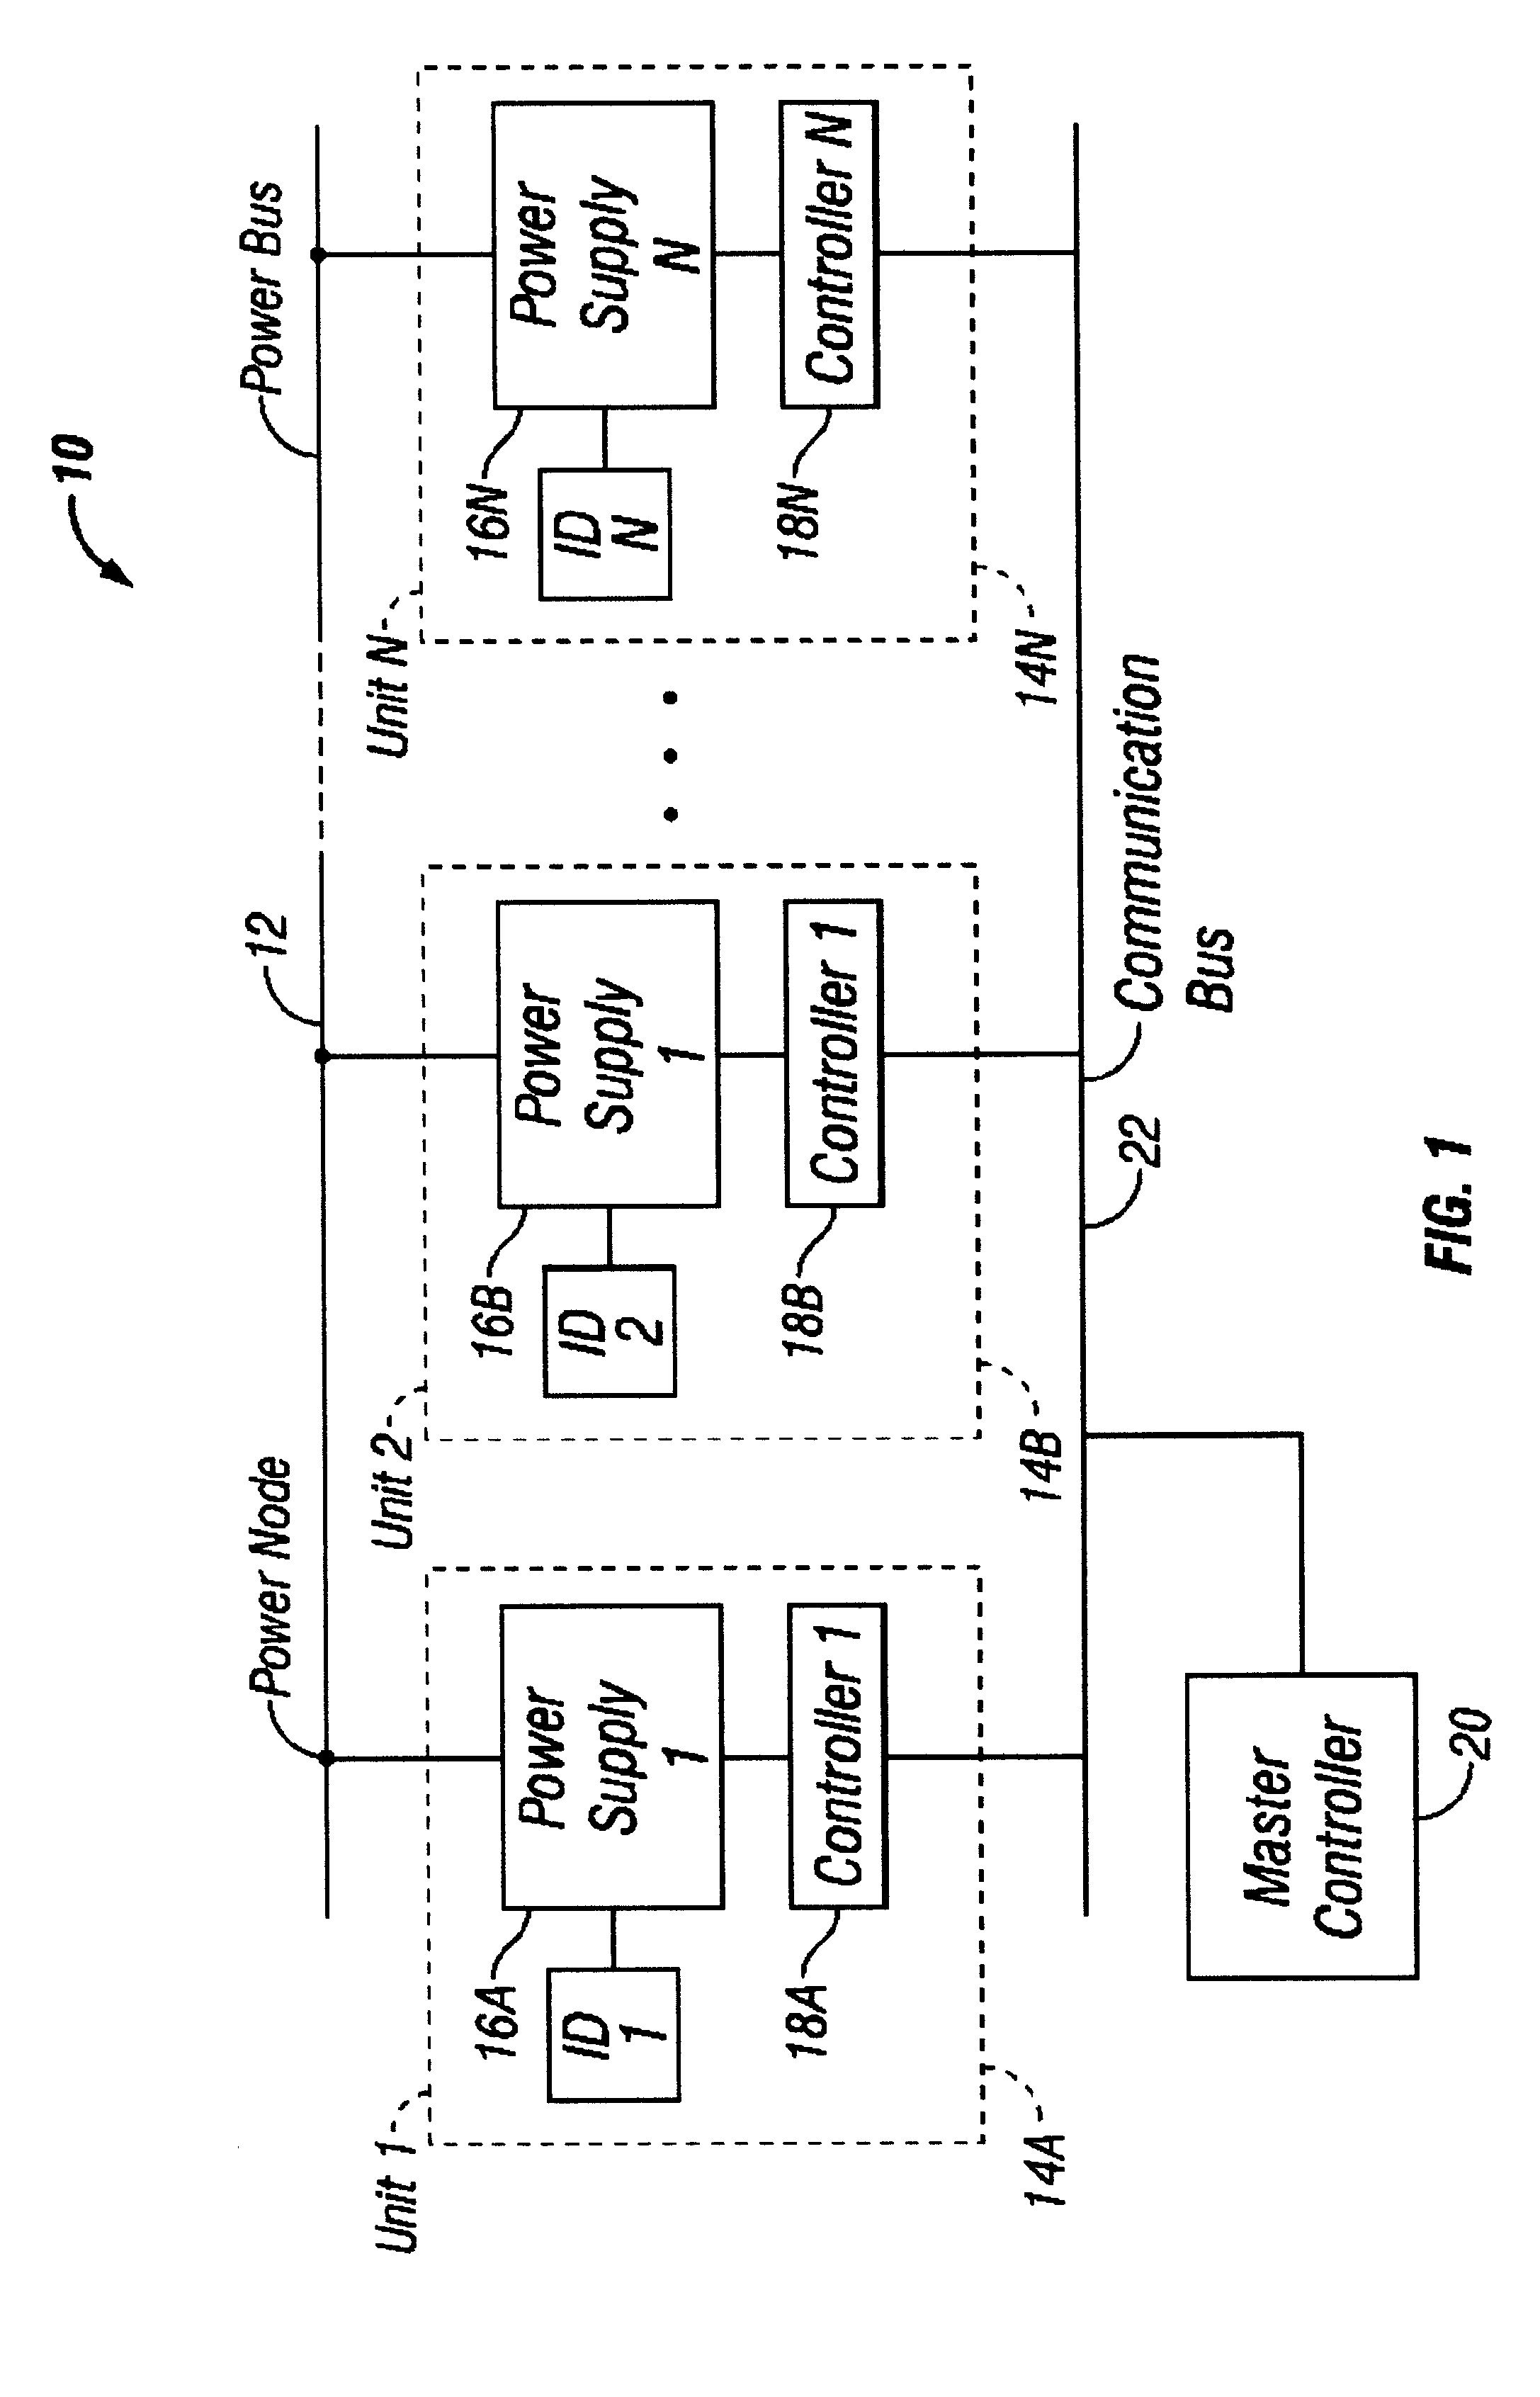 Autonomic control of power subsystems in a redundant power system